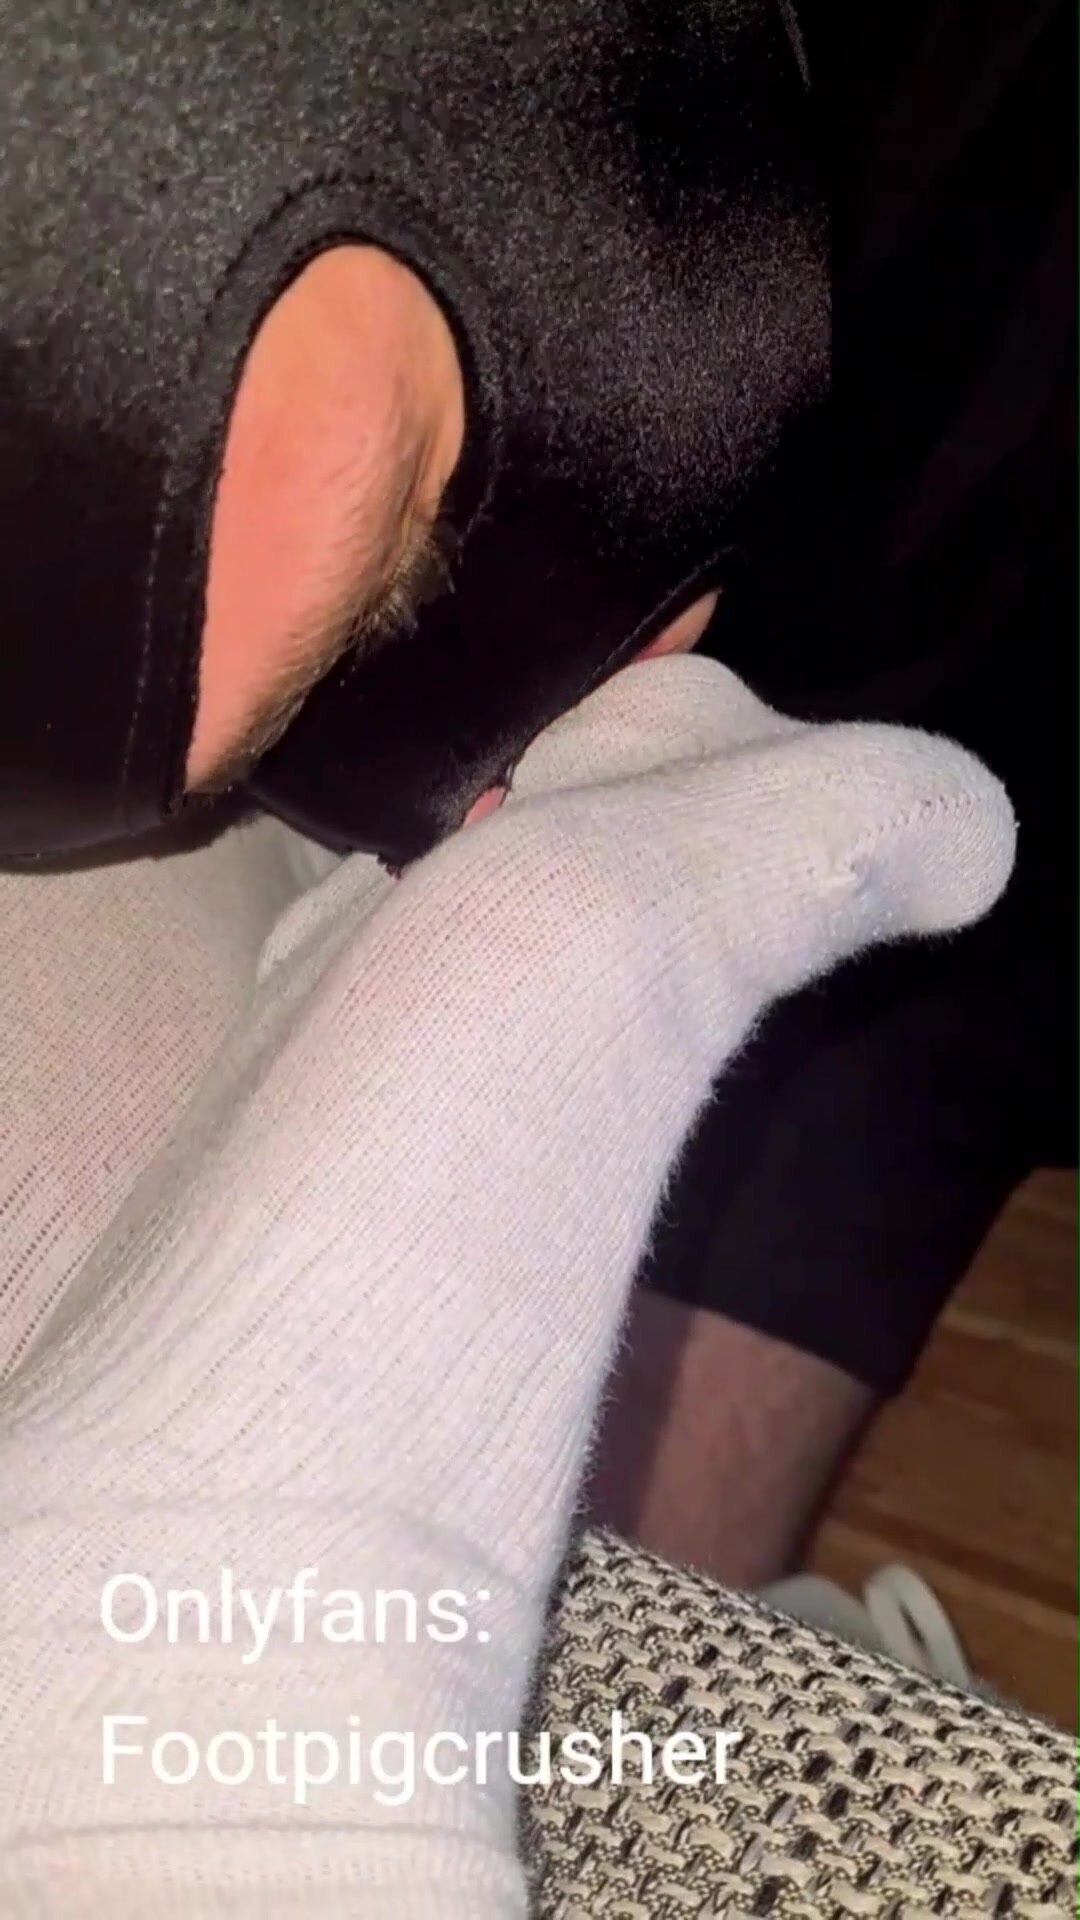 Twink getting horny while sniffing my smelly gym socks